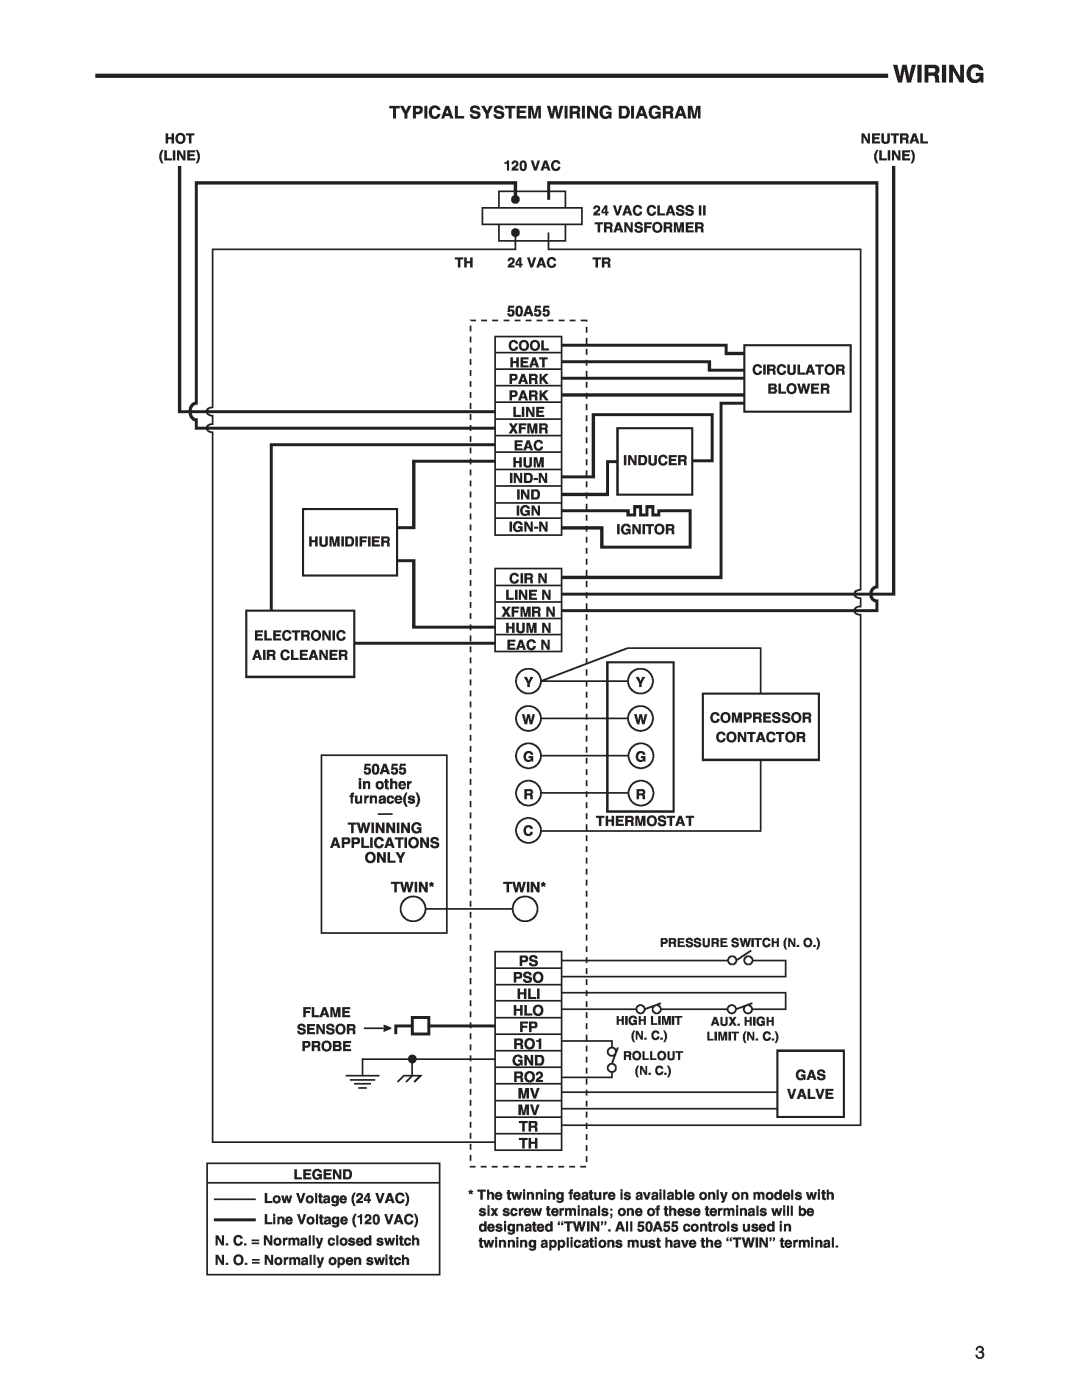 White Rodgers 50A55-743 installation instructions Typical System Wiring Diagram 